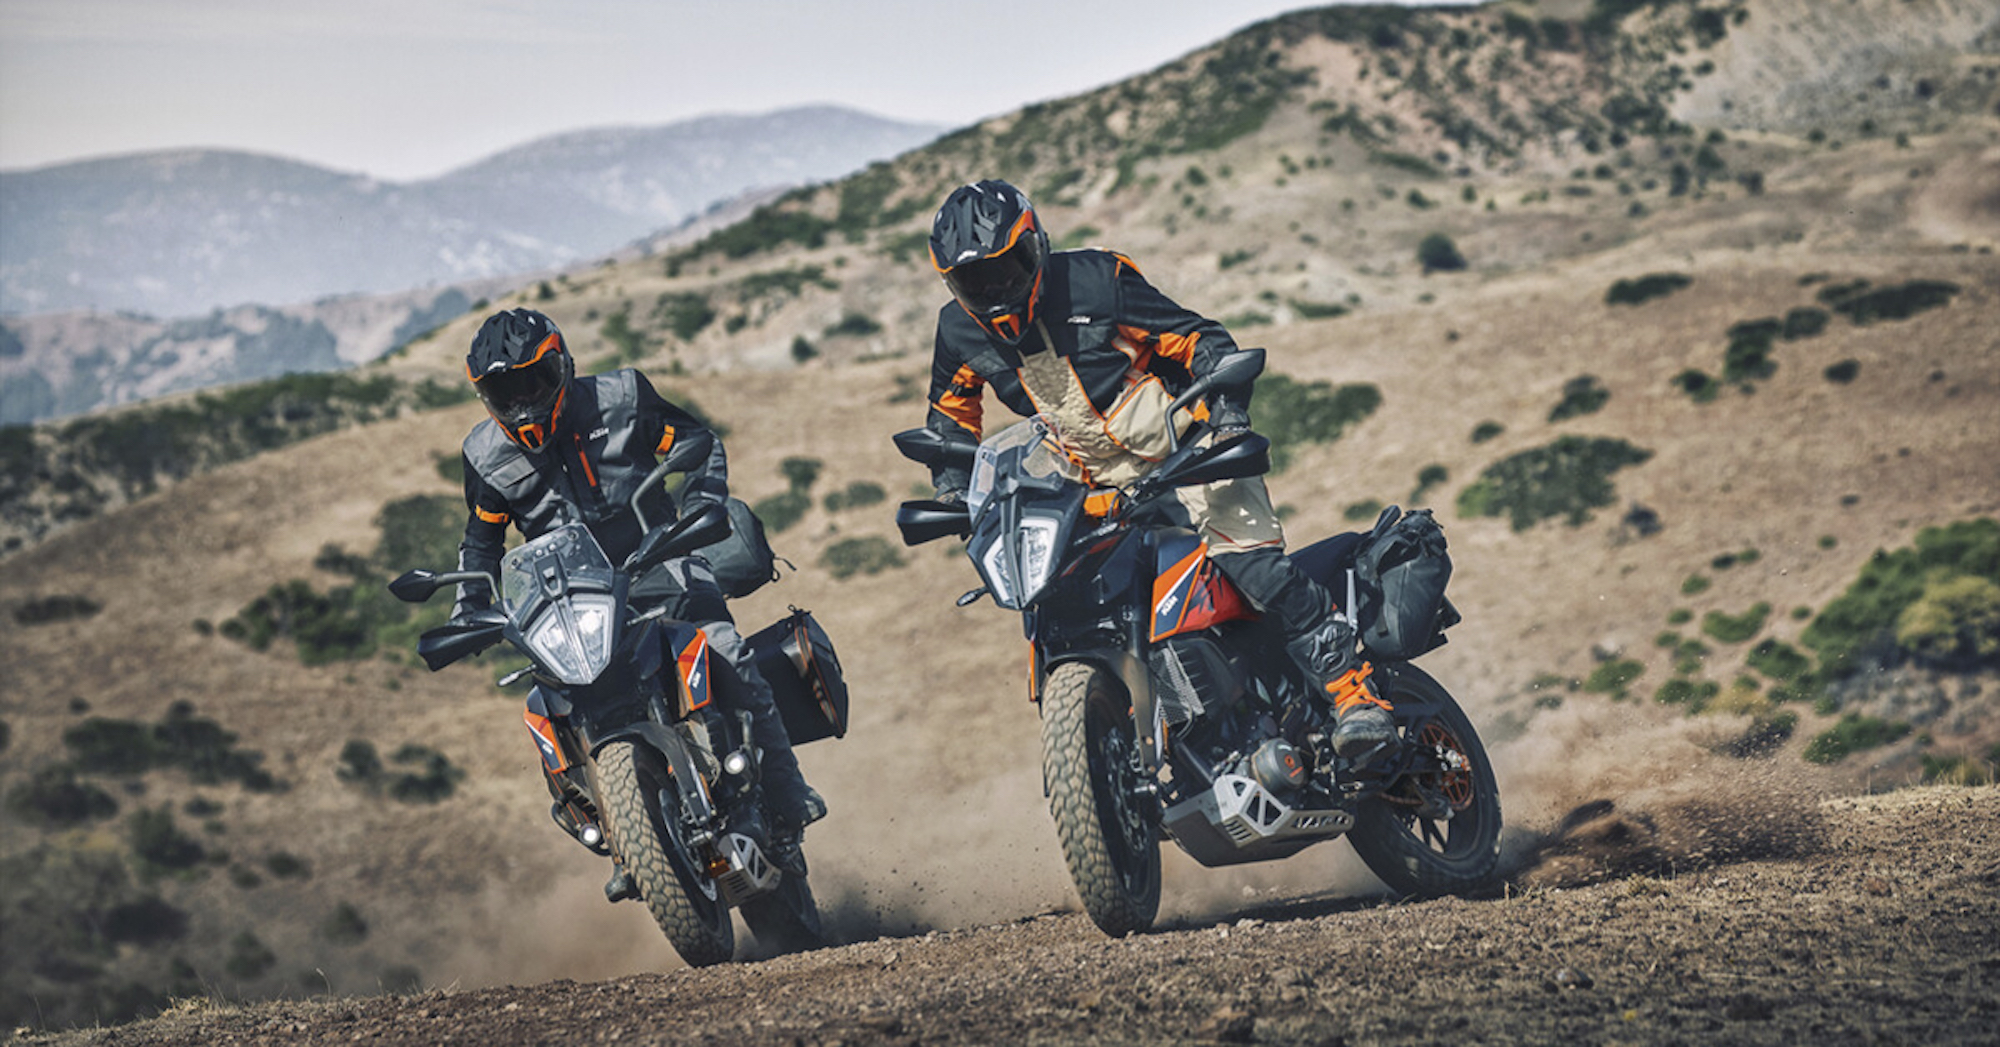 KTM's 390 Adventure, which now features a Low Seat variant. Media sourced from KTM.